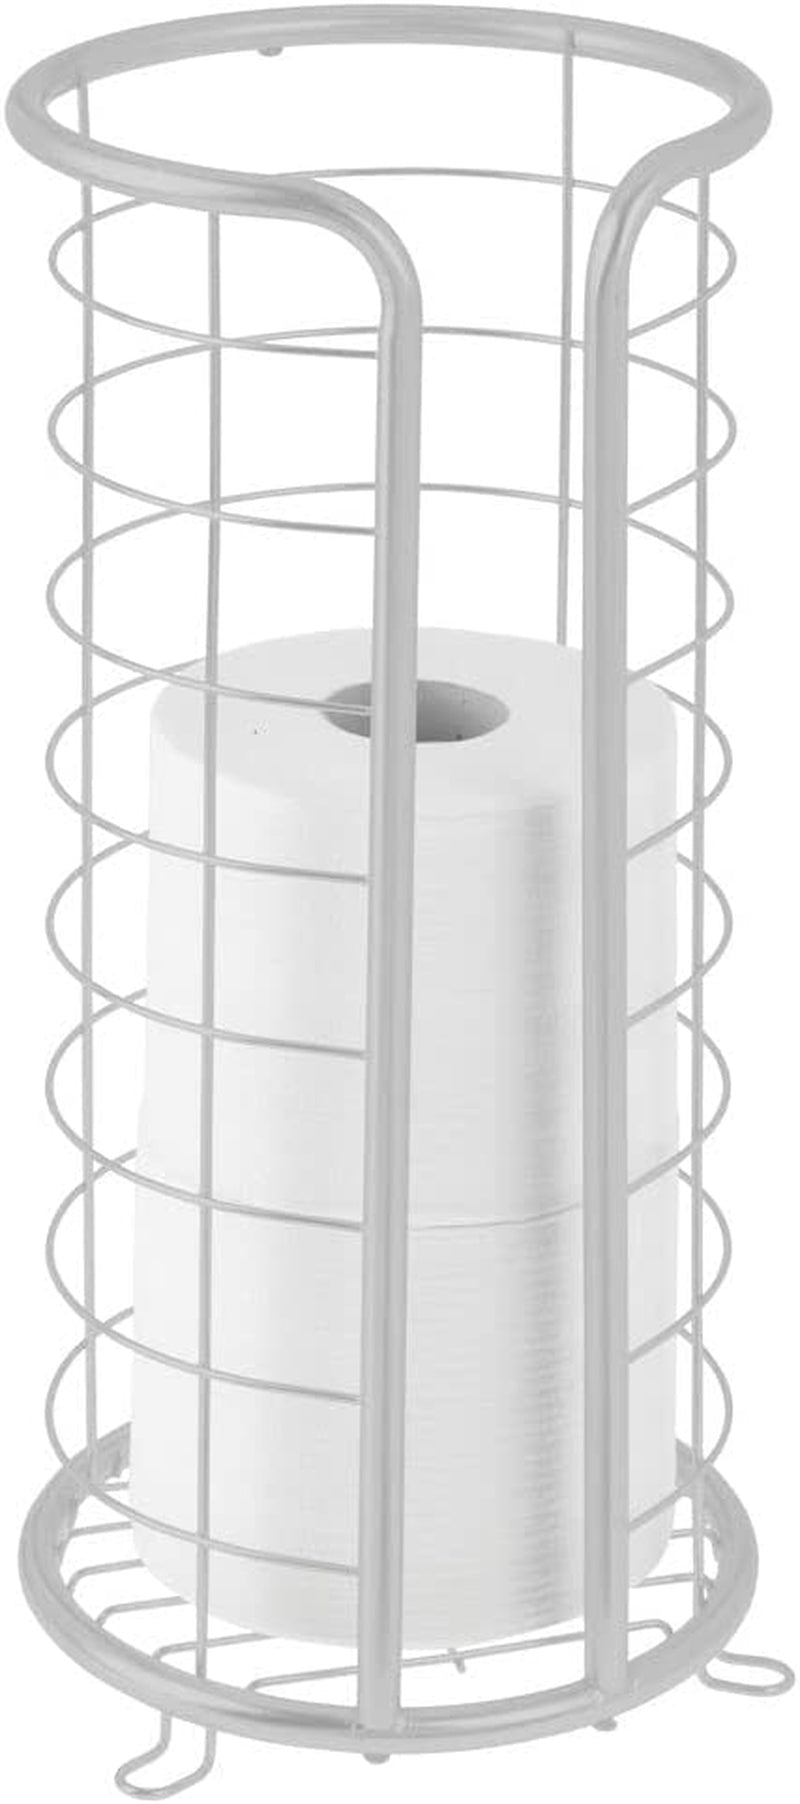 mDesign, Mdesign Decorative Metal Free Standing Toilet Paper Holder Stand with Storage for 3 Rolls of Toilet Tissue - for Bathroom/Powder Room - Holds Mega Rolls - Light Gray